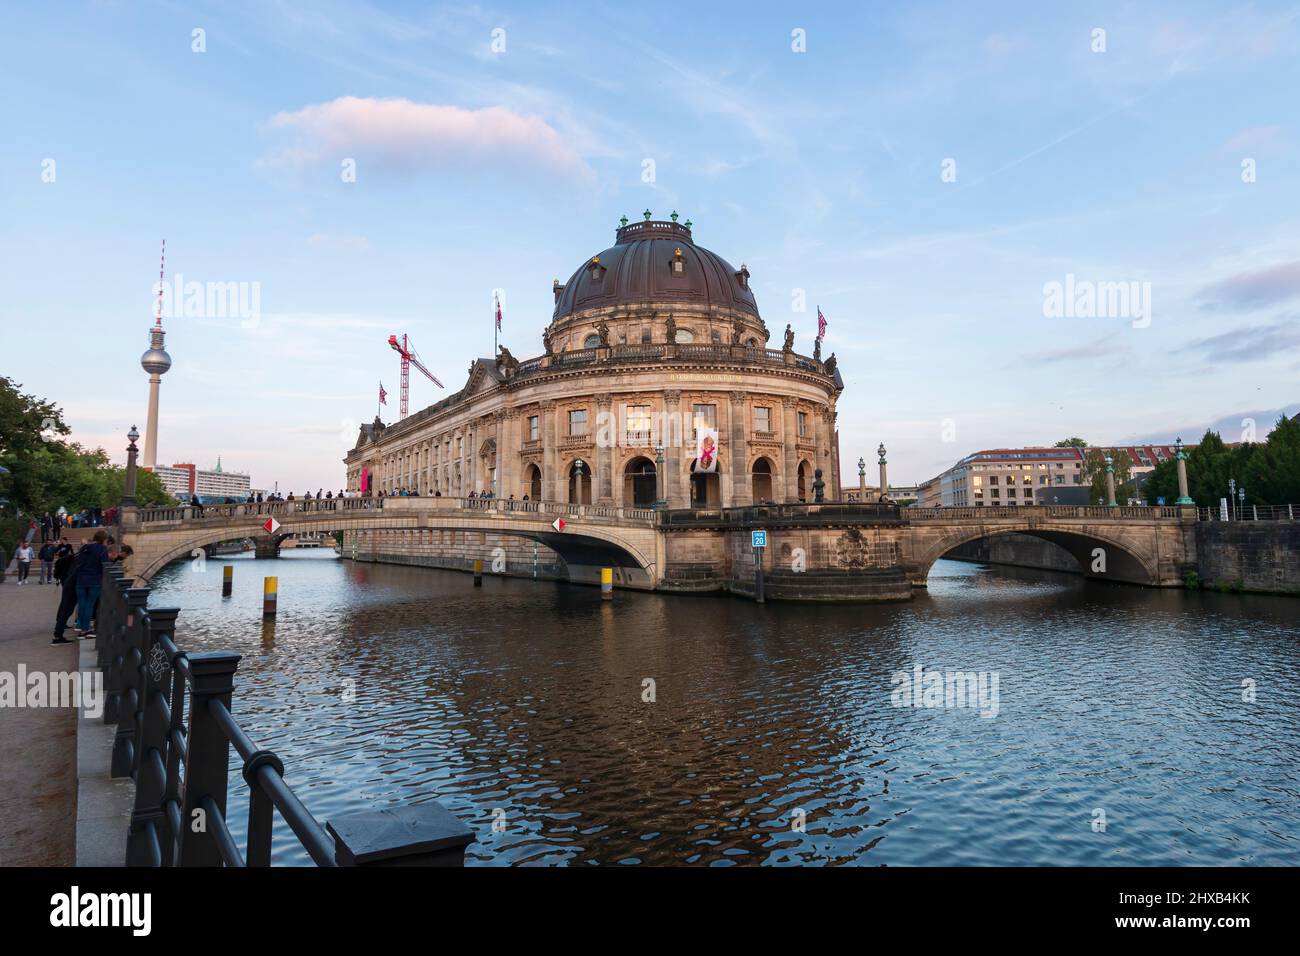 Berlin, Germany - July 14, 2019: The Bode Museum located on Museum Island Berlin Mitte at sunset Stock Photo